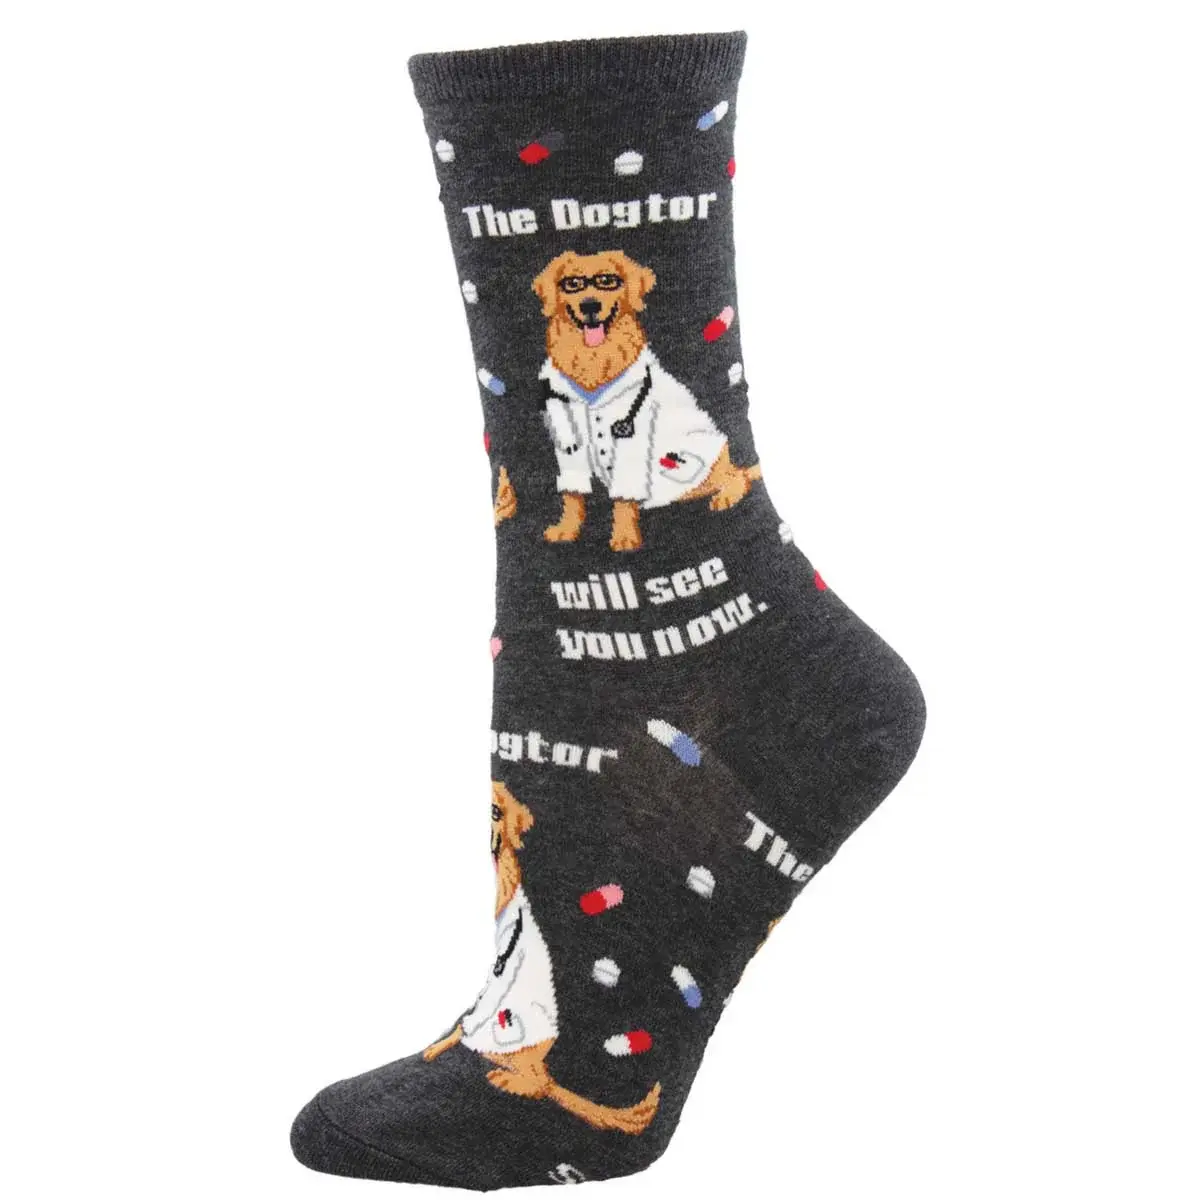 Socksmith - The Dogtor Is In - Charcoal Heather - Crew - Women's